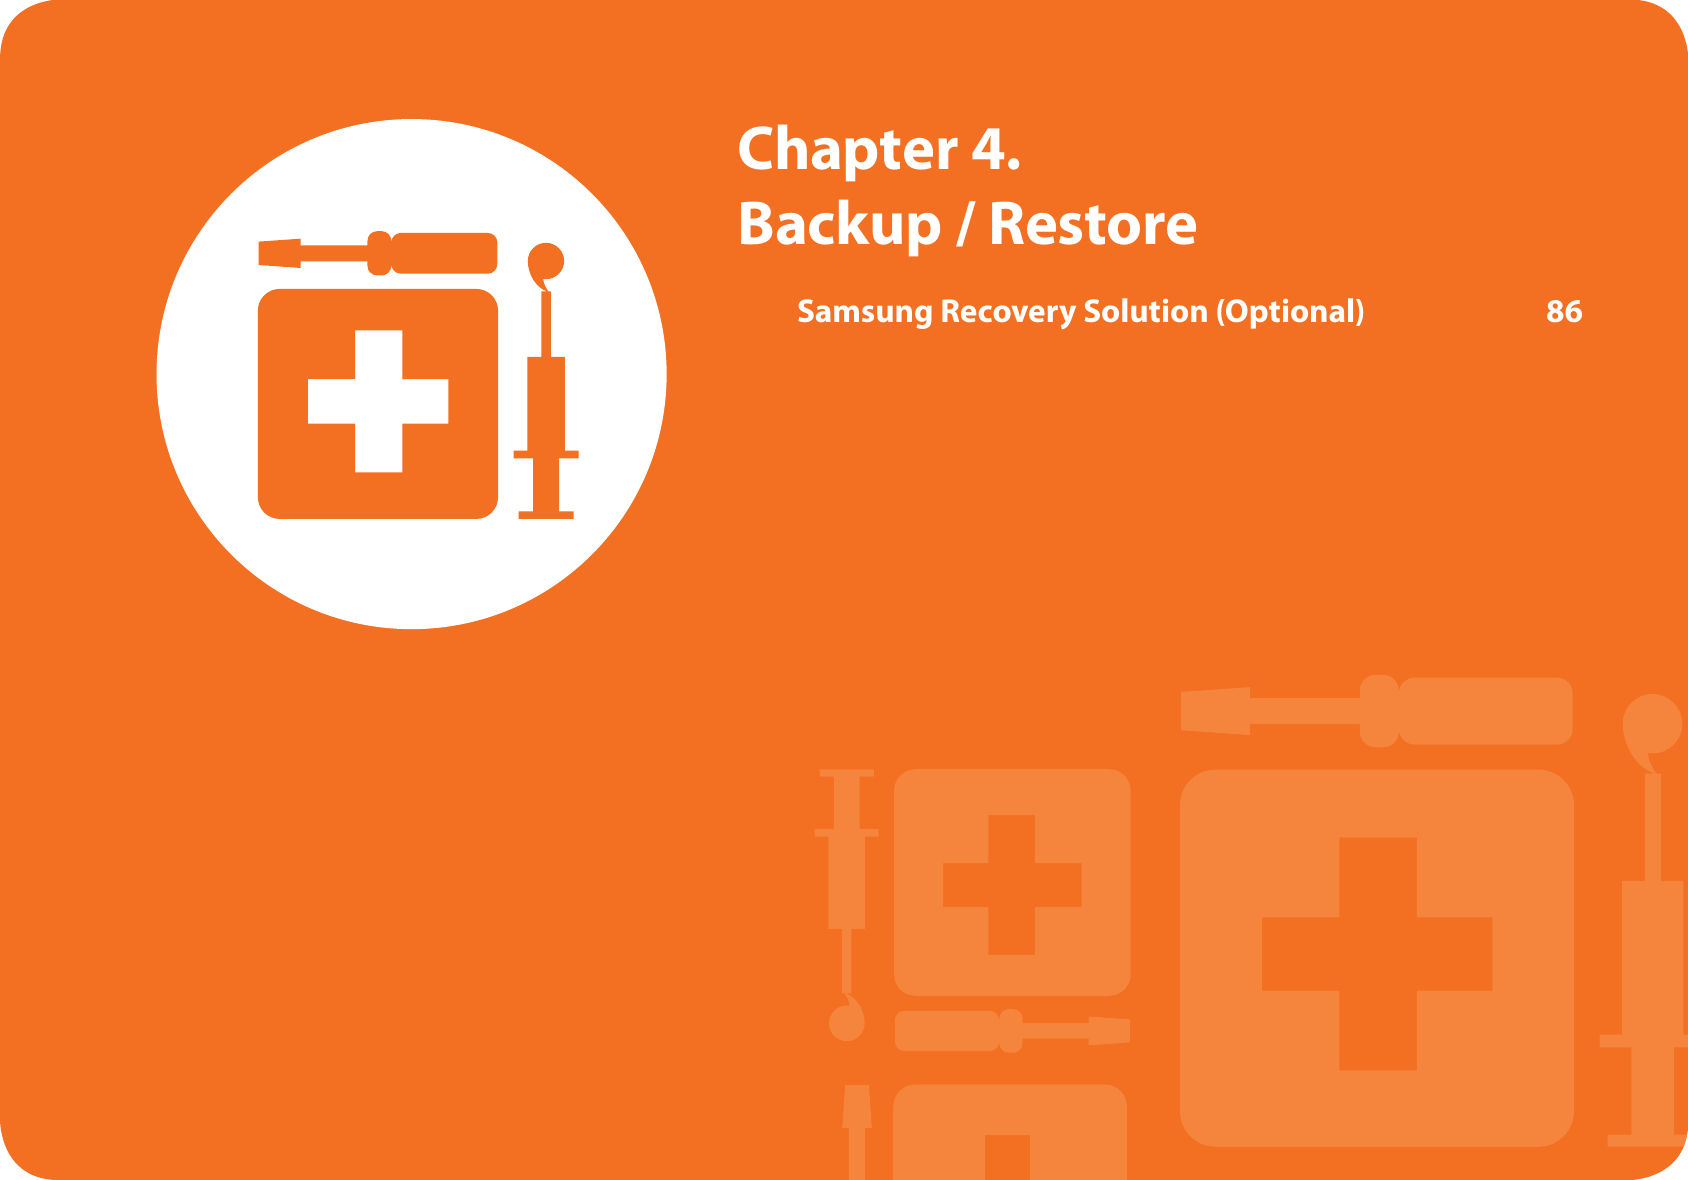  Chapter  4. Backup / RestoreSamsung Recovery Solution (Optional)  86